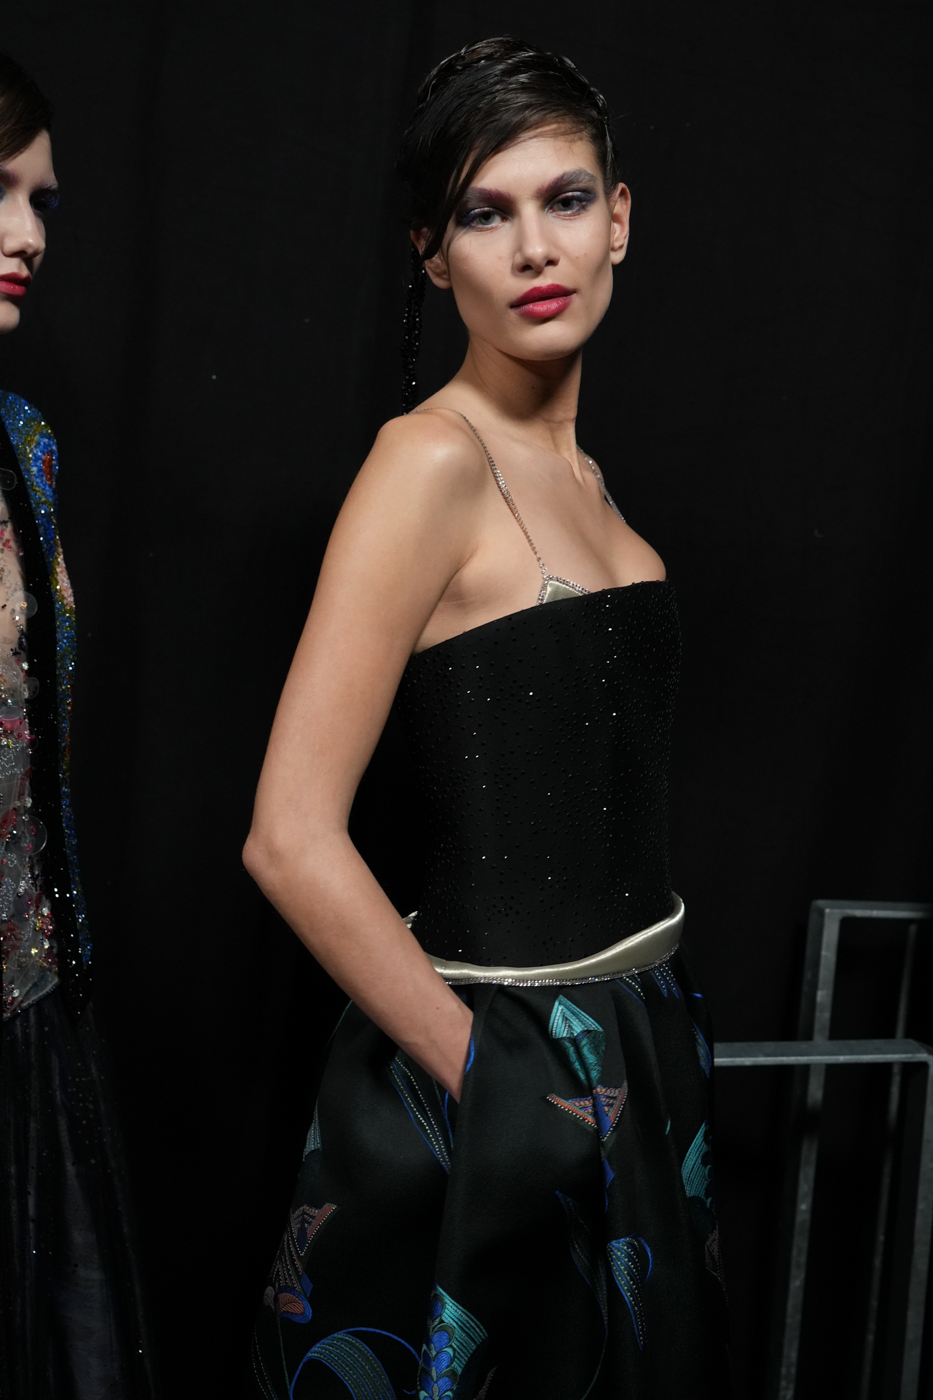 backstage photography by Marco Tassini during Armani Prive fashion show